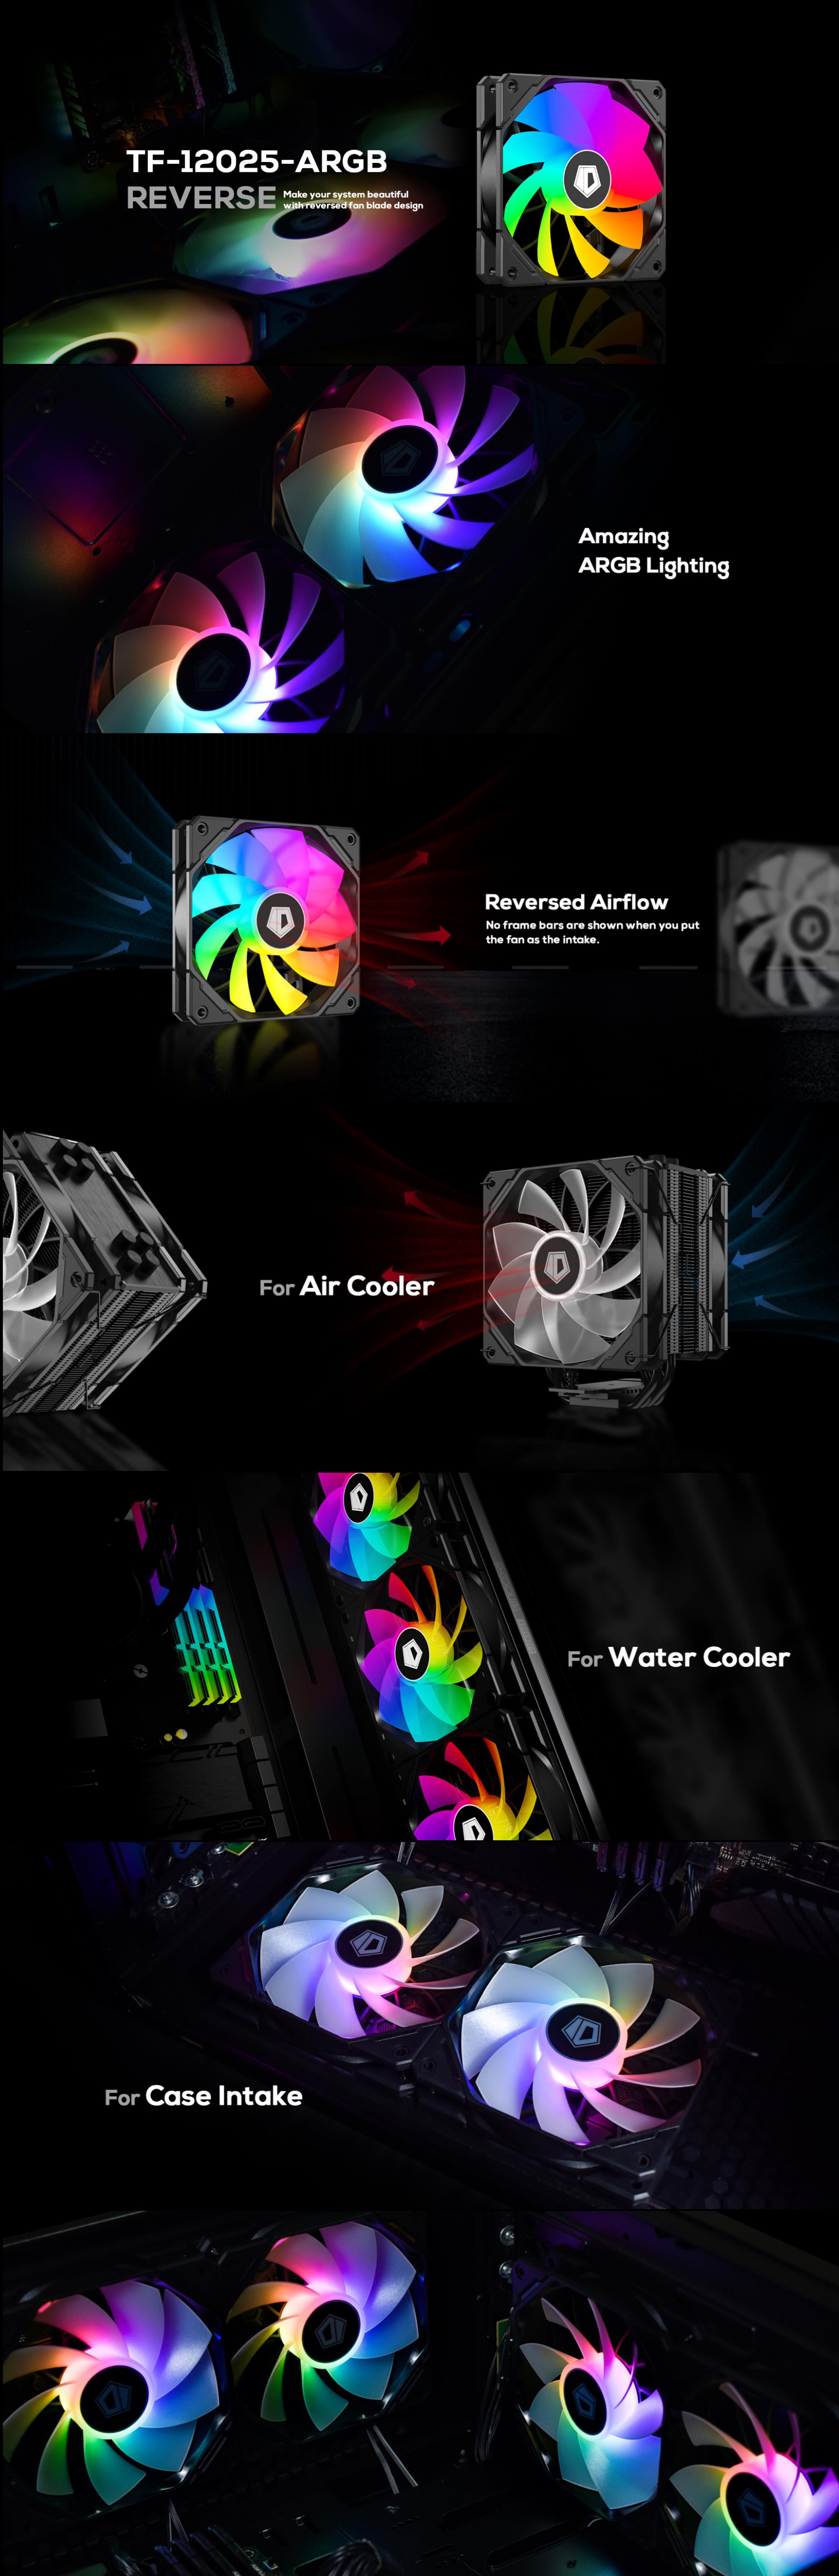 A large marketing image providing additional information about the product ID-COOLING TF Series 120mm ARGB Reverse Case Fan - Black - Additional alt info not provided